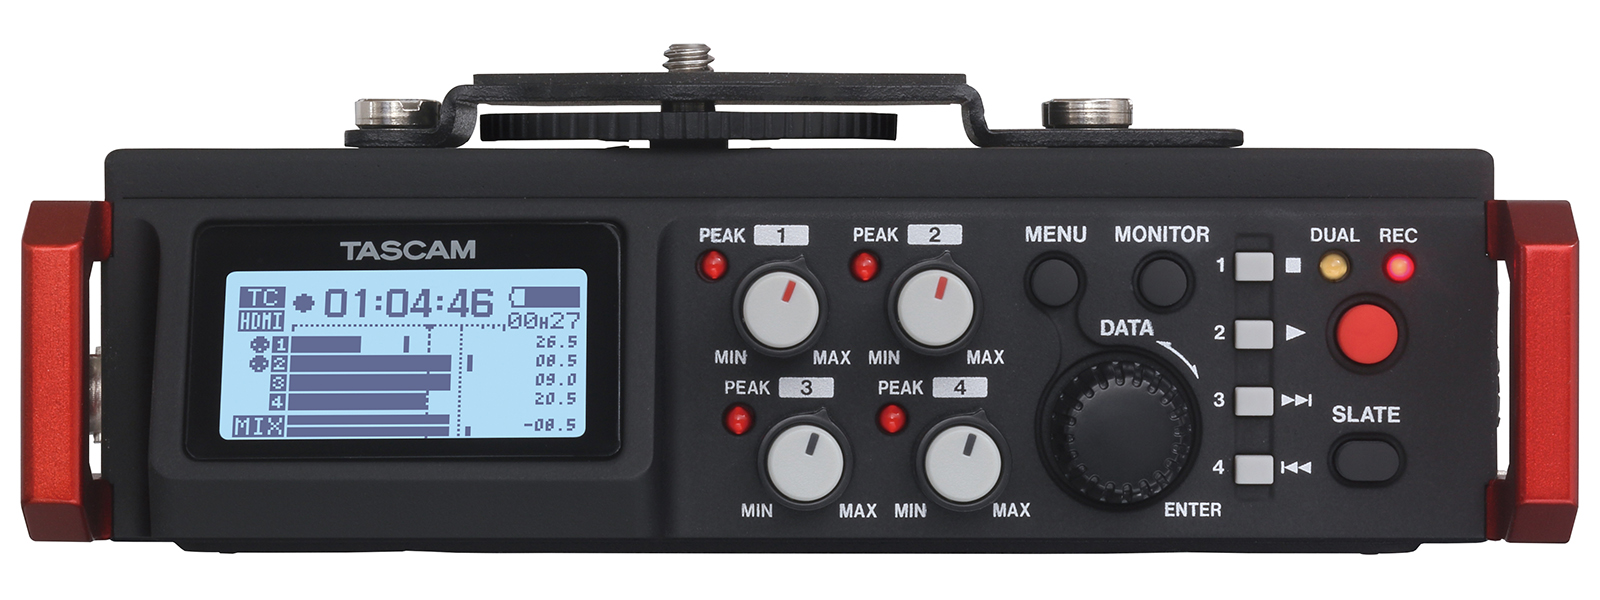 DR-701D | FEATURES | TASCAM - United States